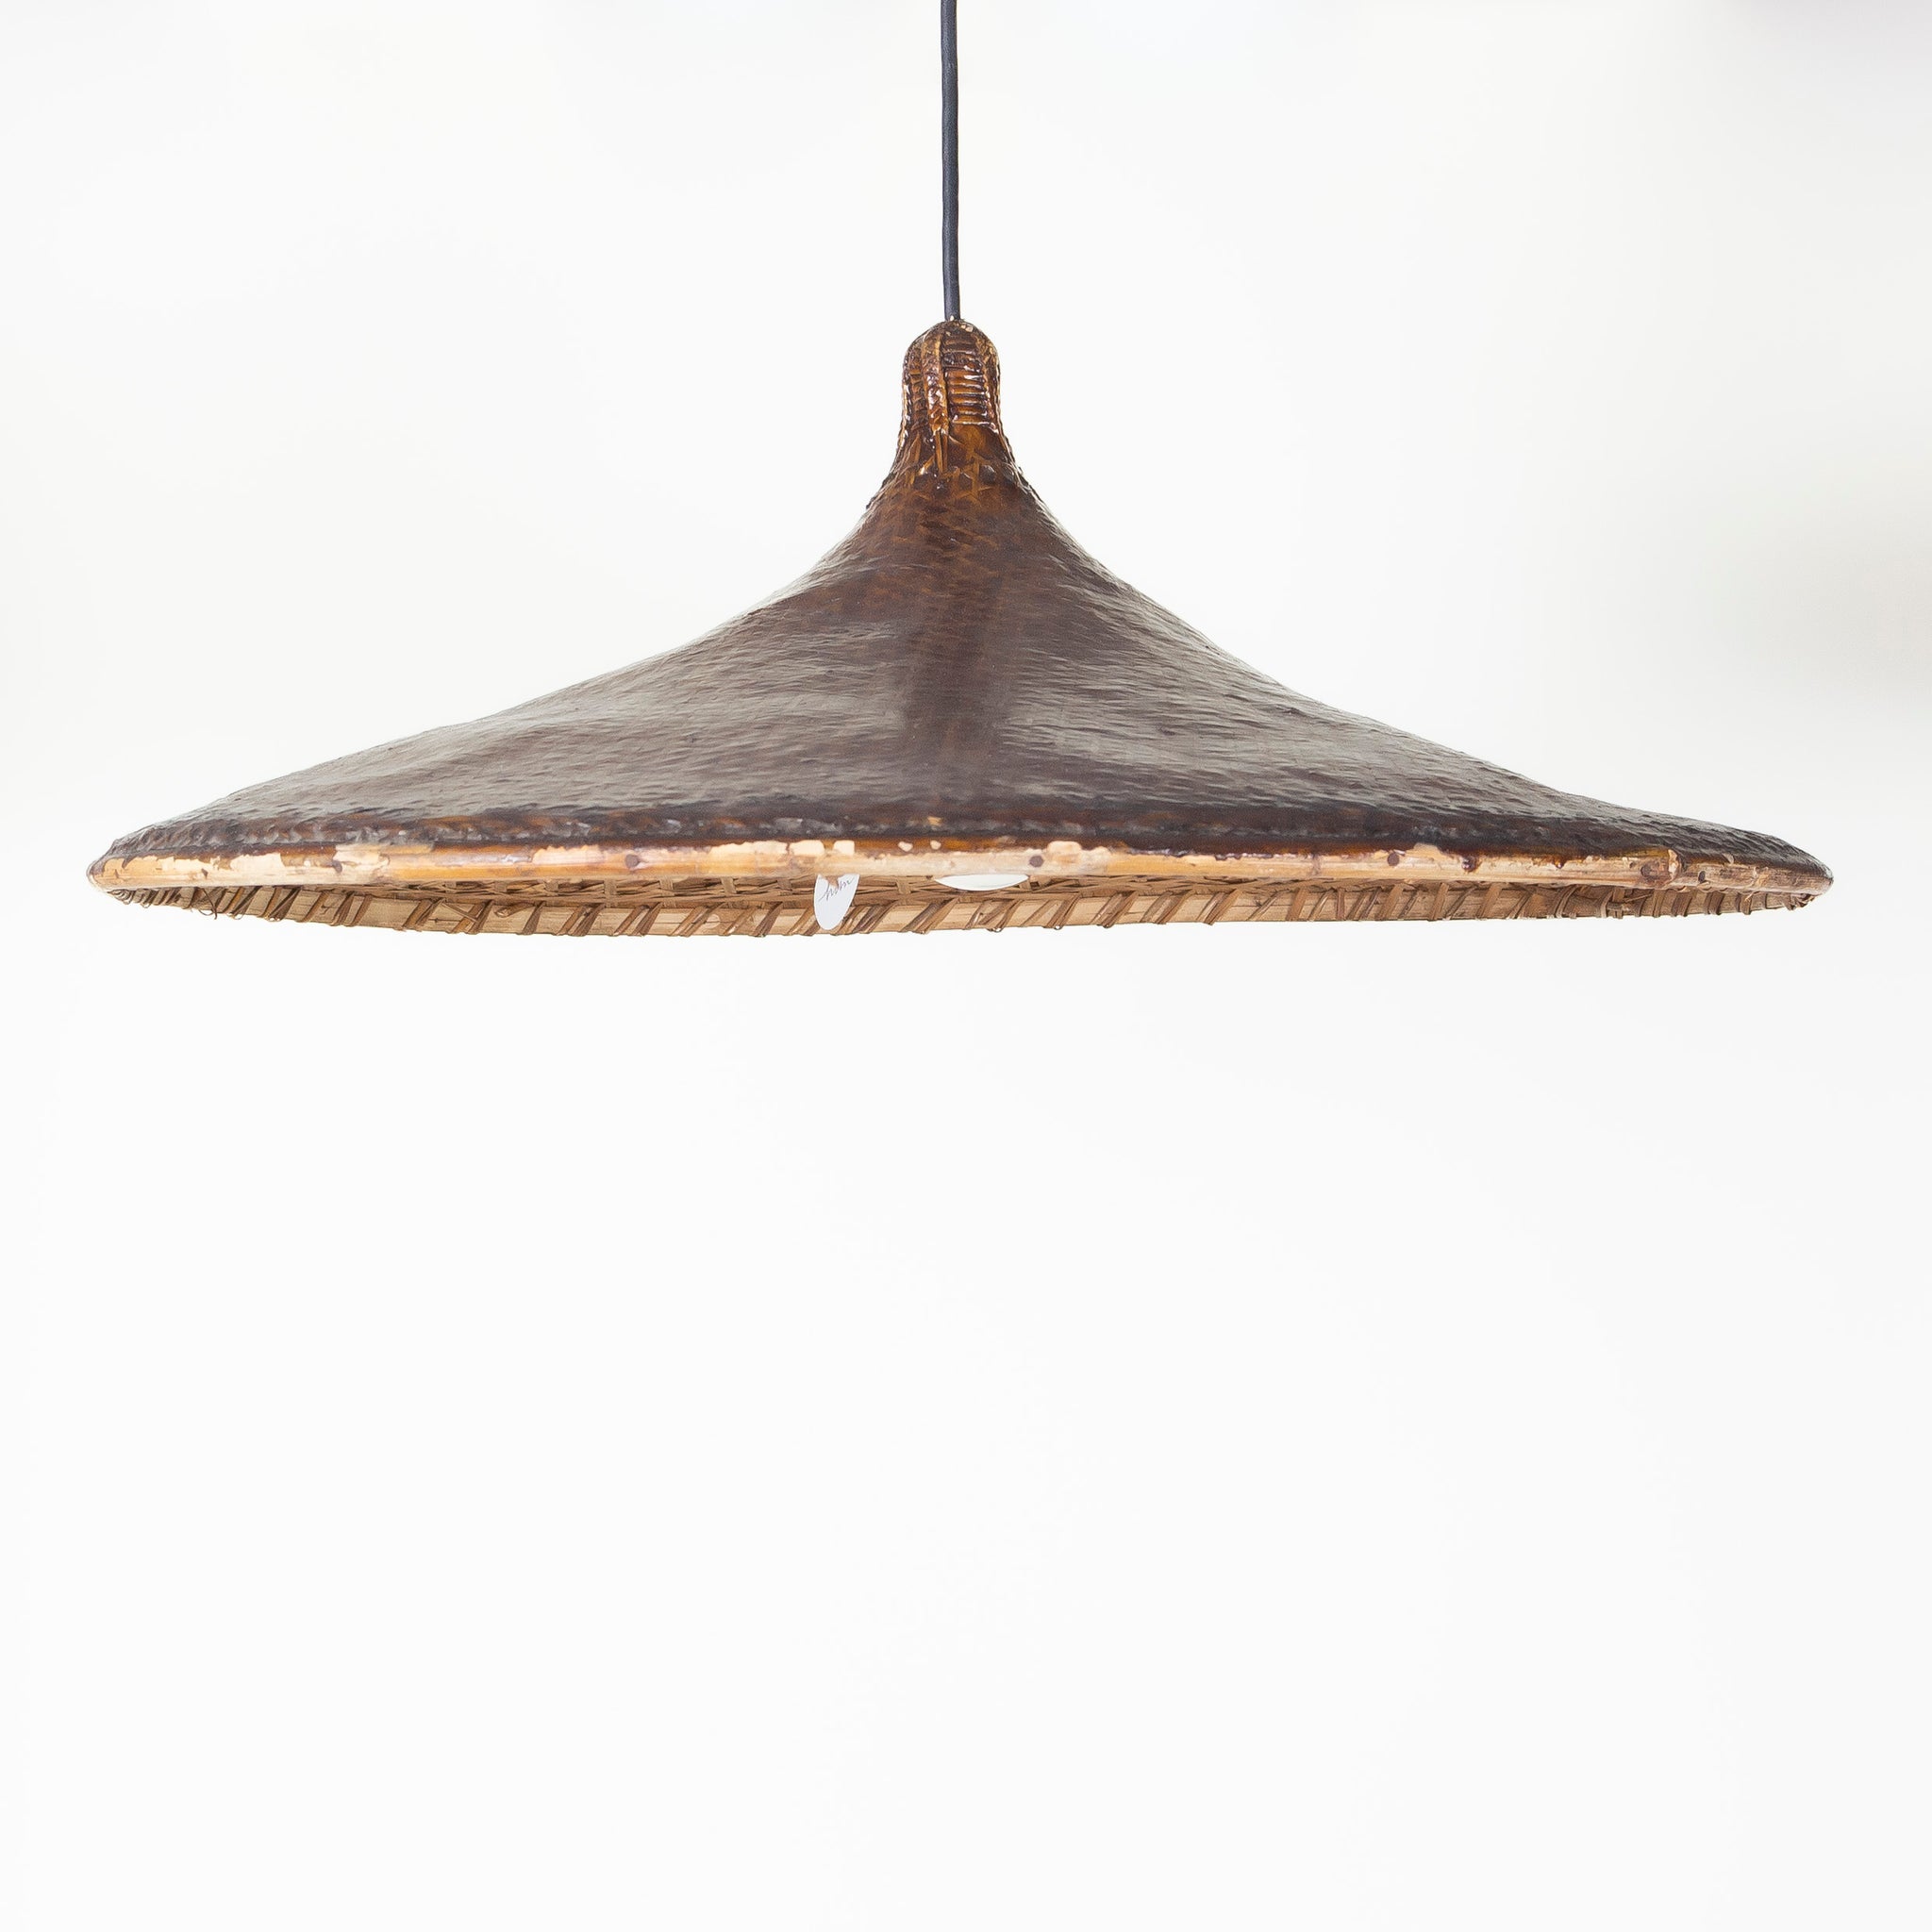 Vintage Chinese Hats turned into Pendant lights